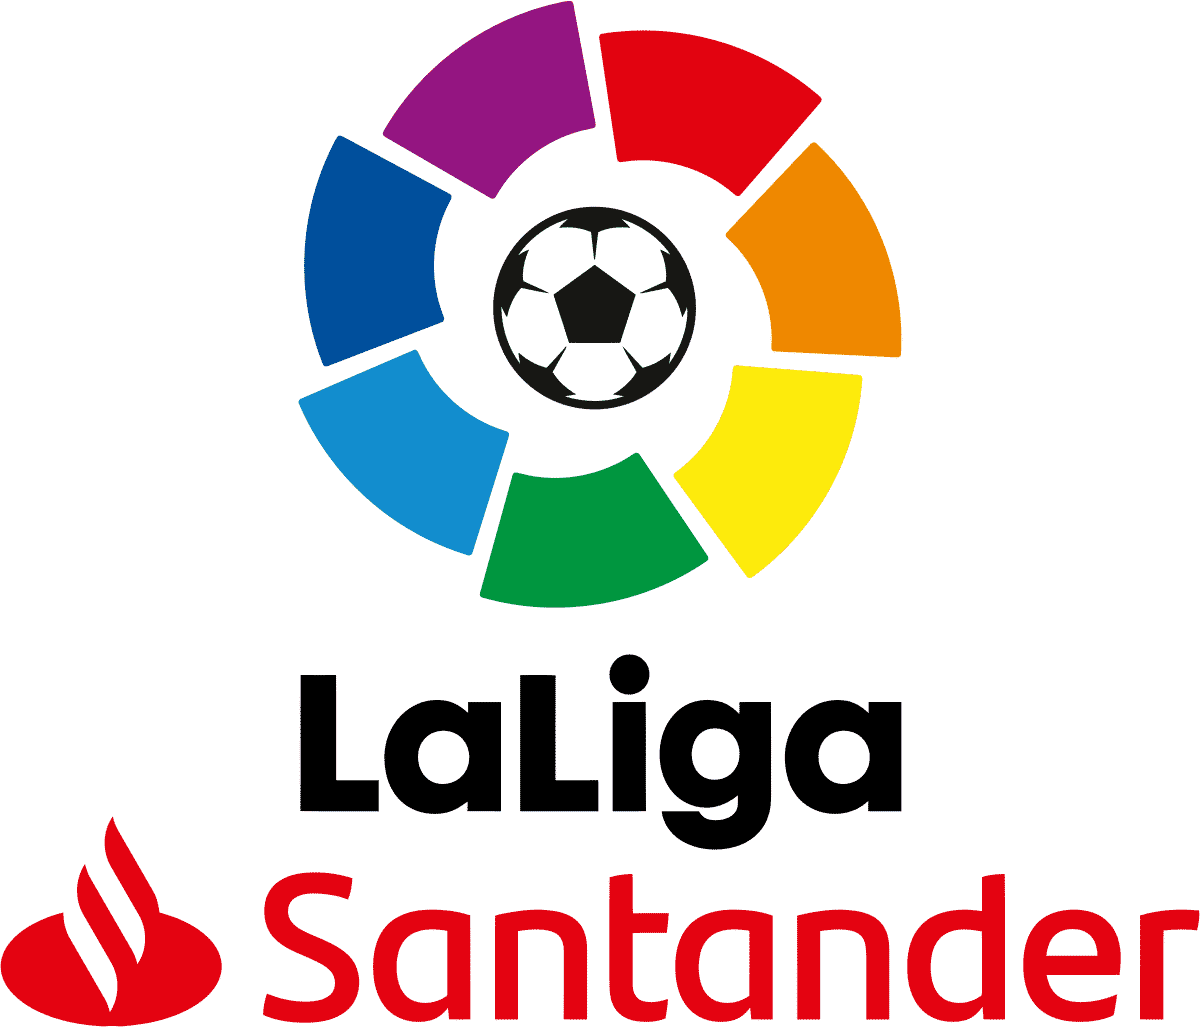 Laliga set June 30th for the draw of the fixtures ahead of new season